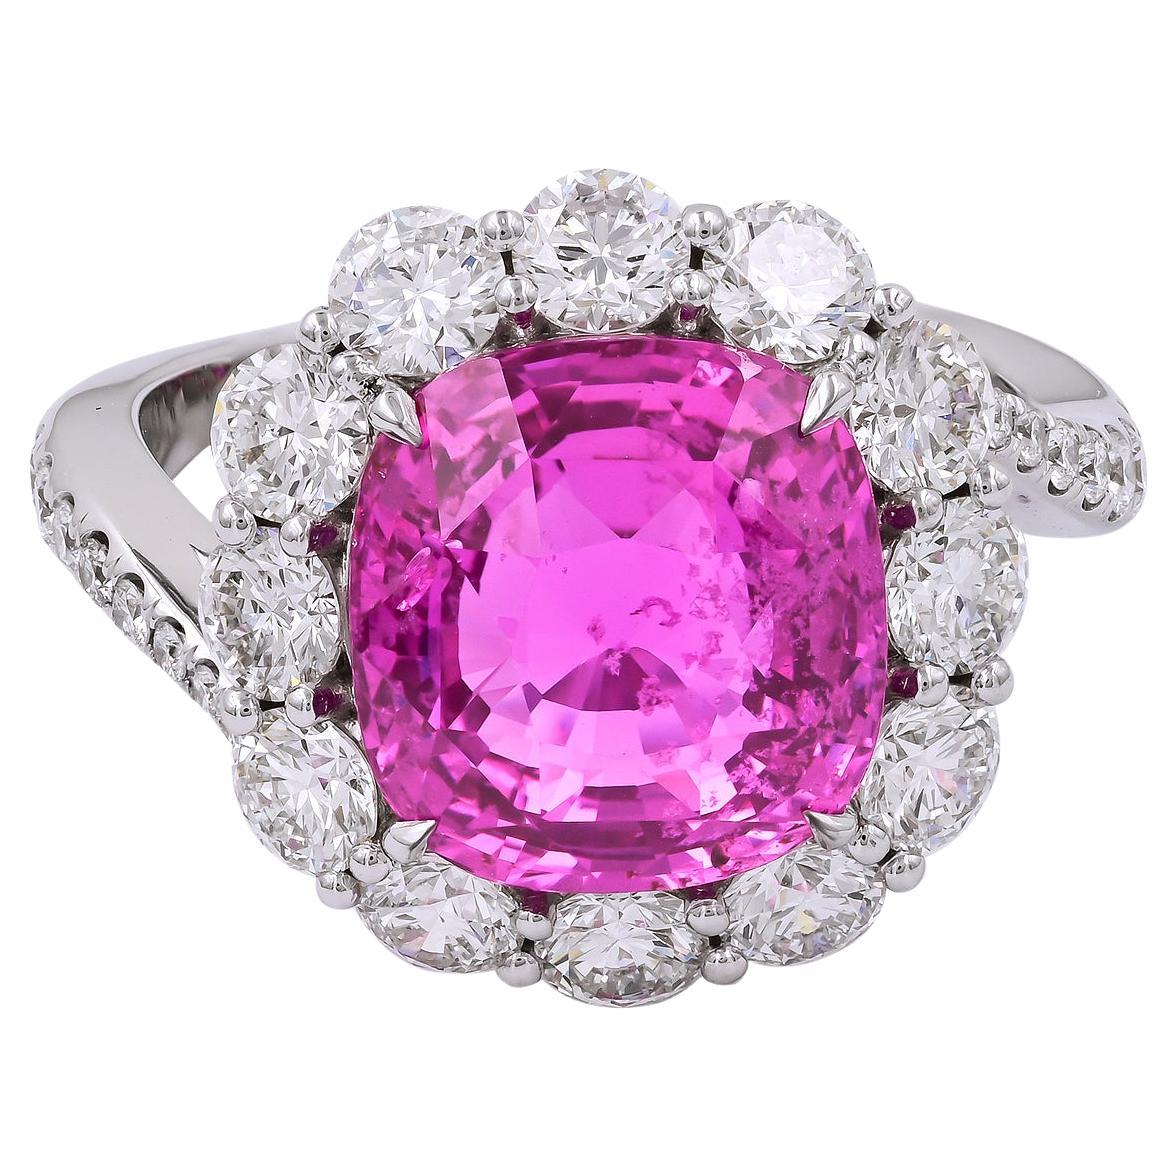 Spectra Fine Jewelry GRS Certified 7.08 carat Cushion Pink Sapphire Ring For Sale